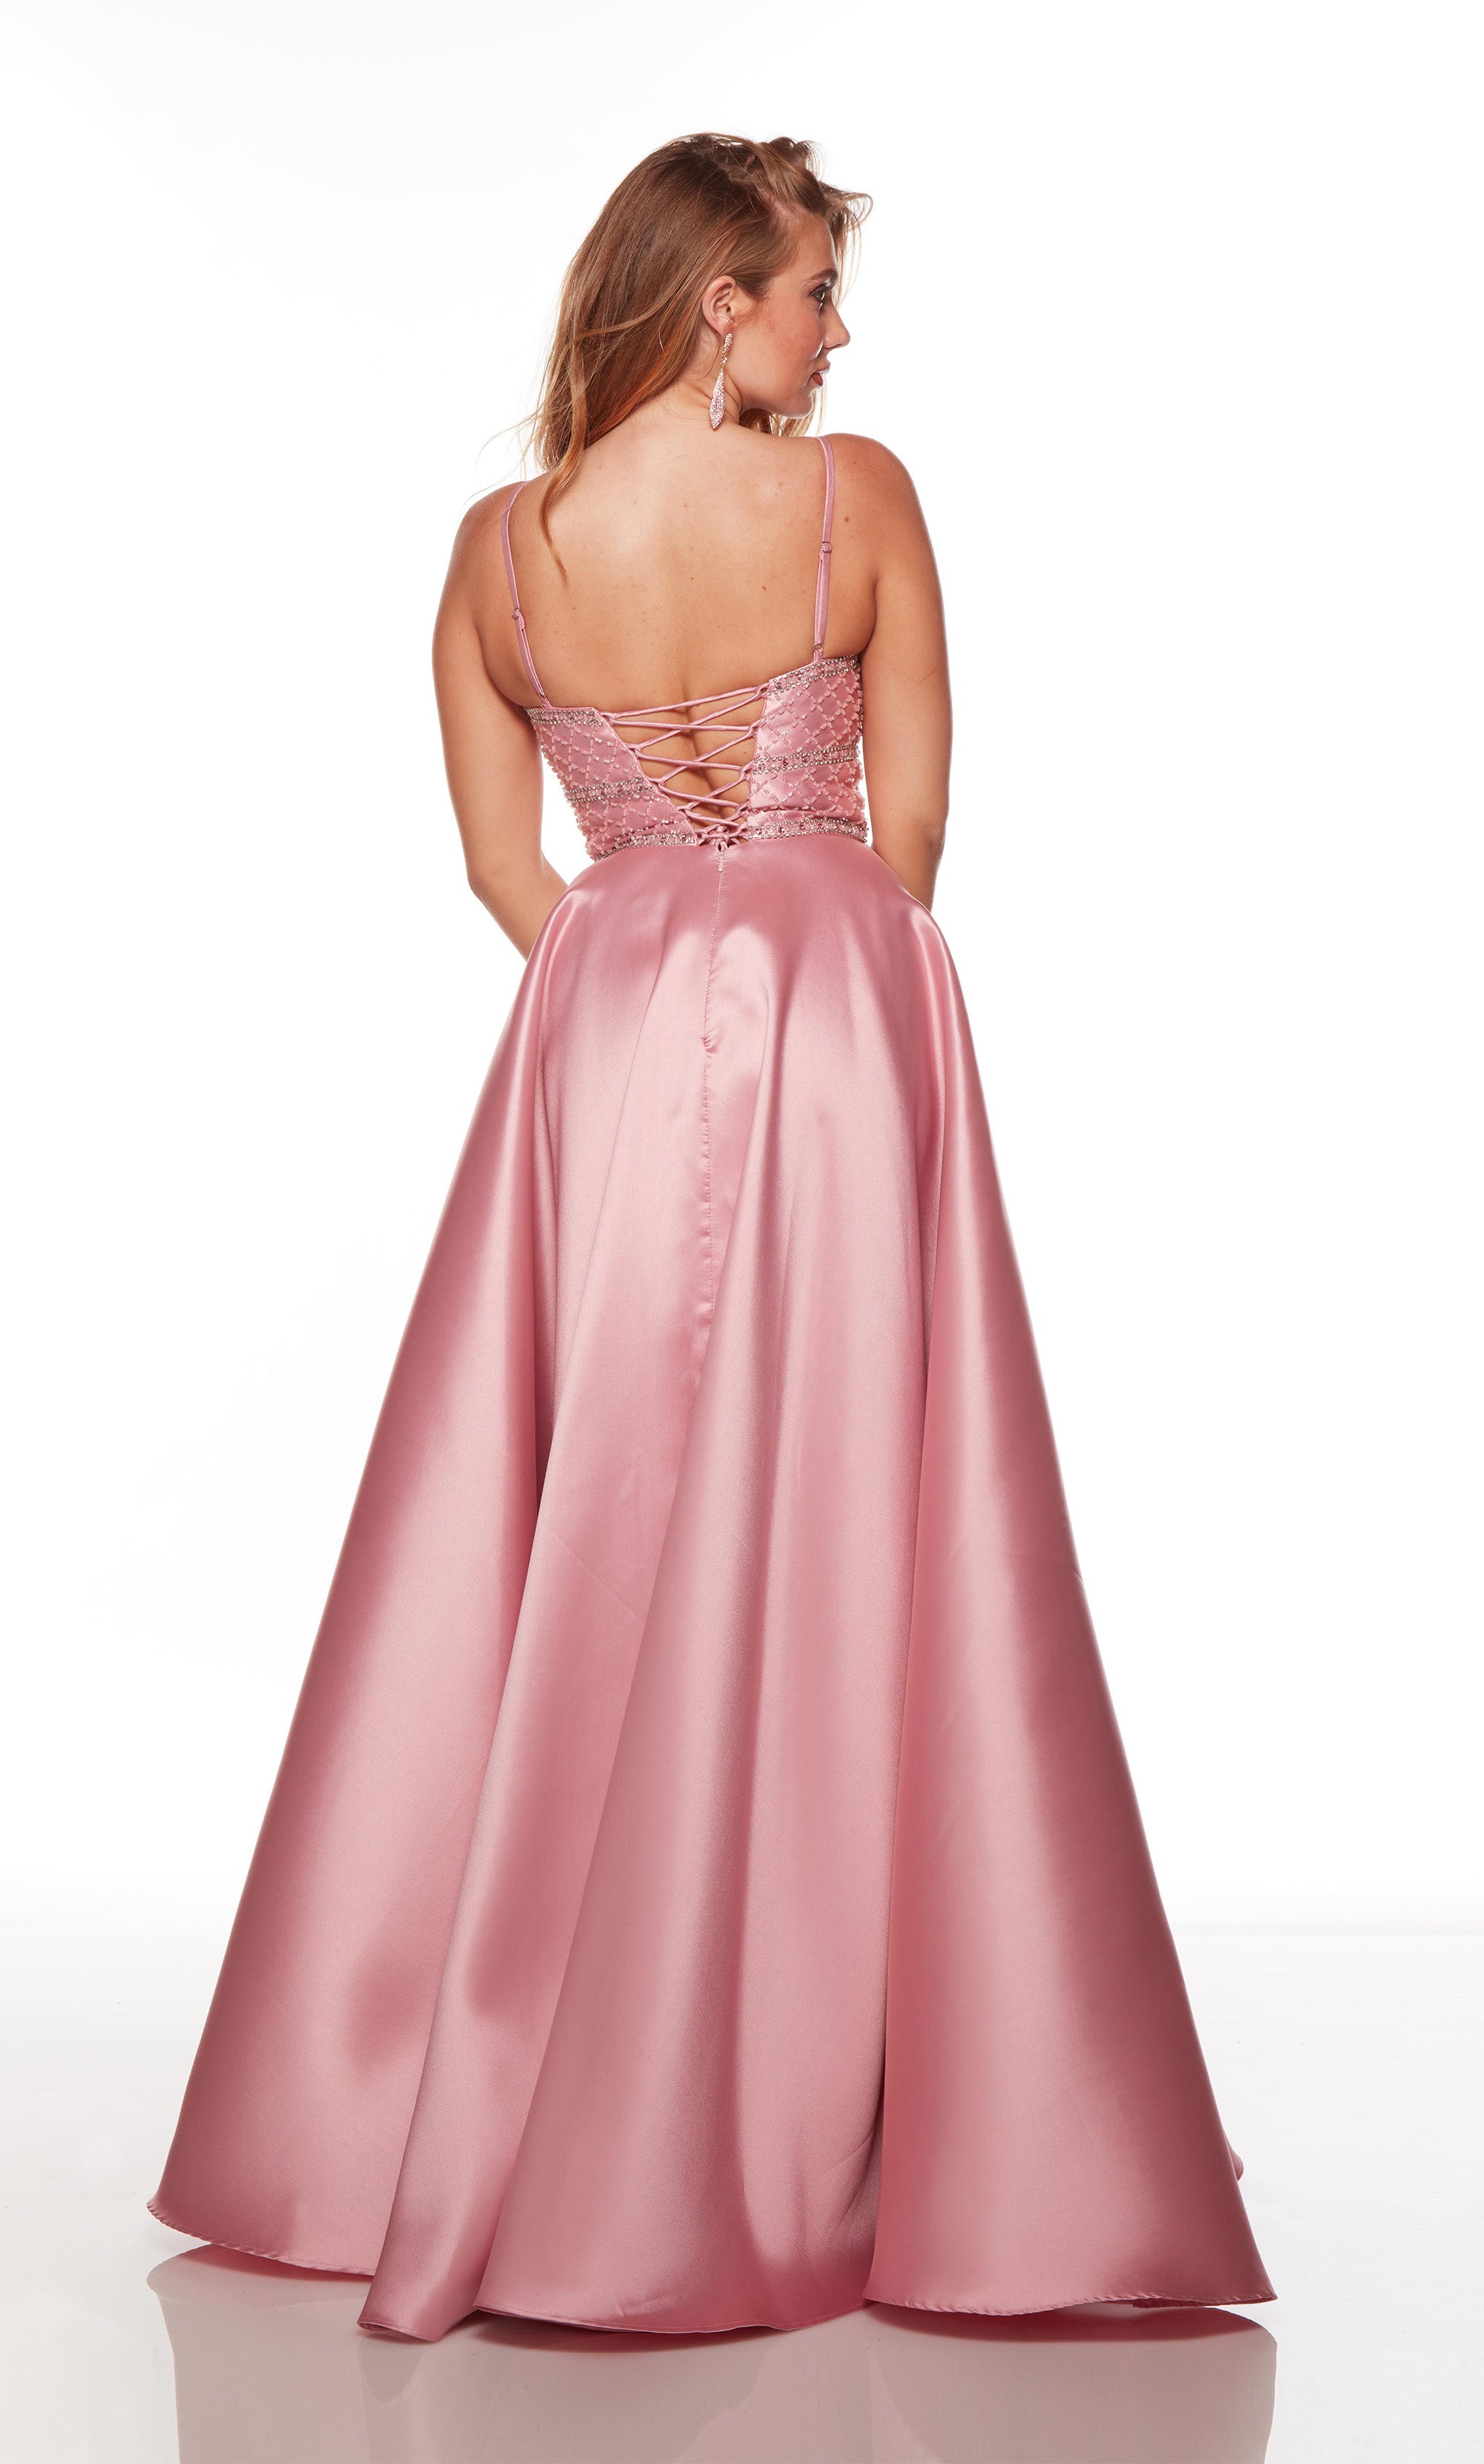 Pretty pink prom dress with a beaded bodice, pockets, and side slit. COLOR-SWATCH_1766__LIGHT-MAUVE